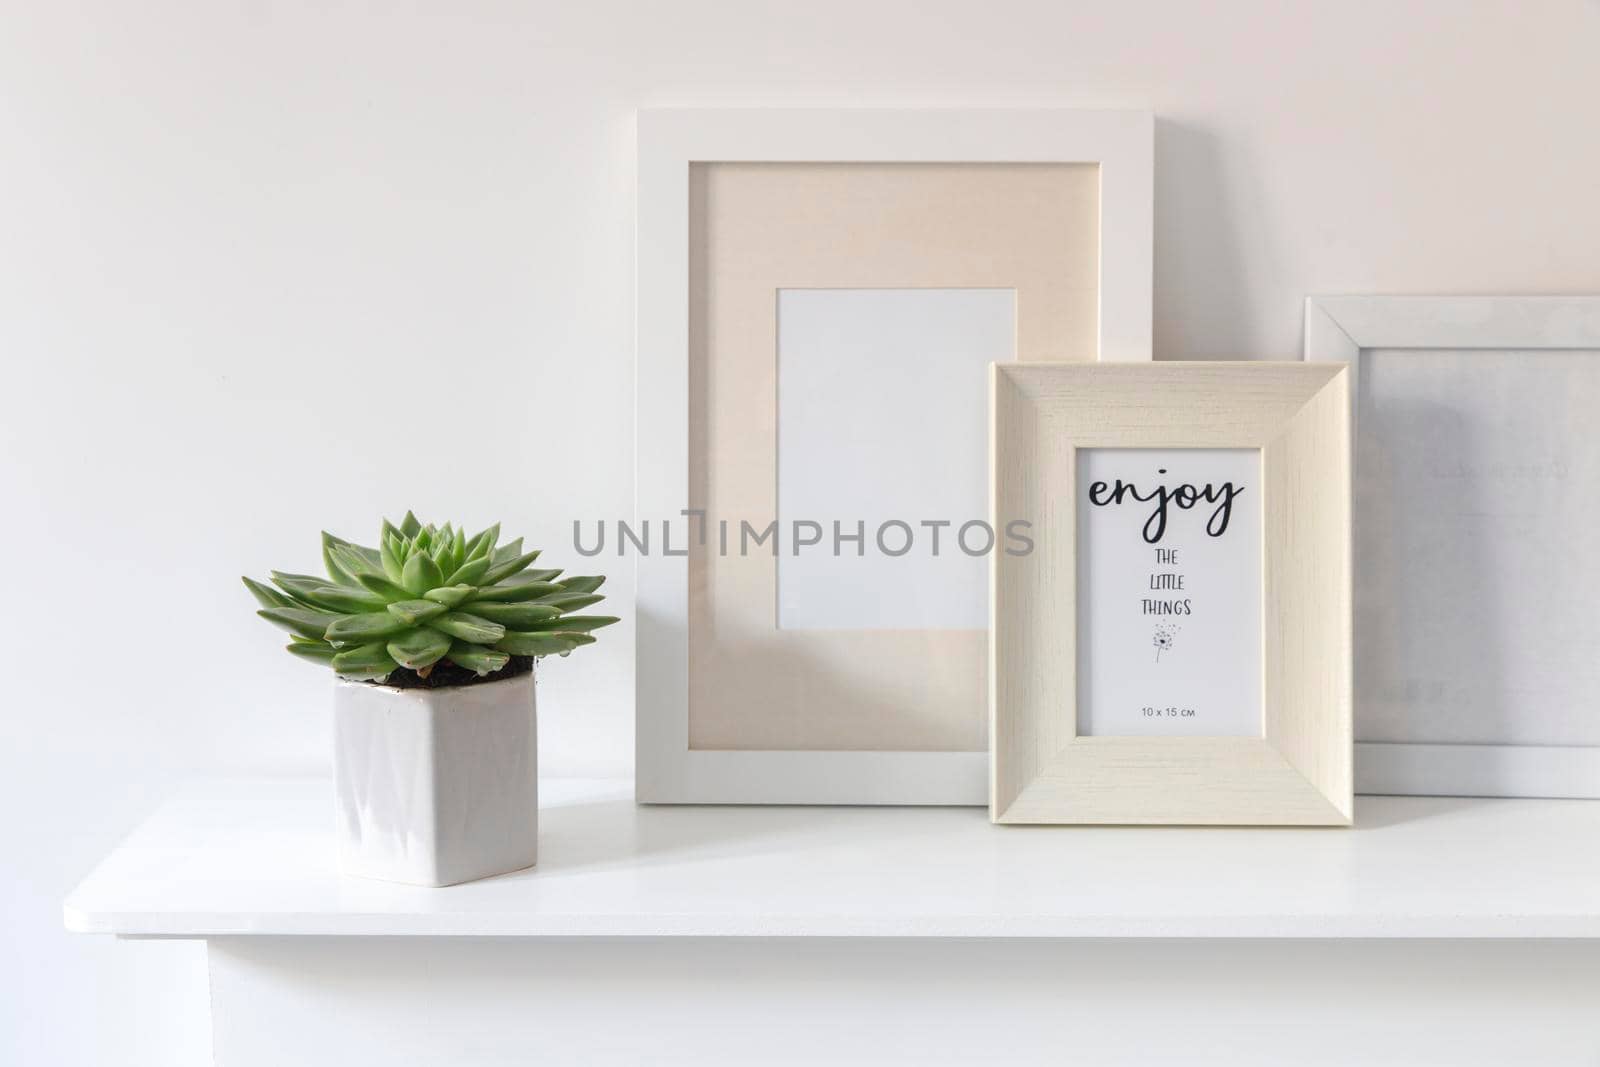 Echeveria in a geometric vase, photo frames on a chest of drawers against a white wall. Scandinavian style. Ready layout. by elenarostunova